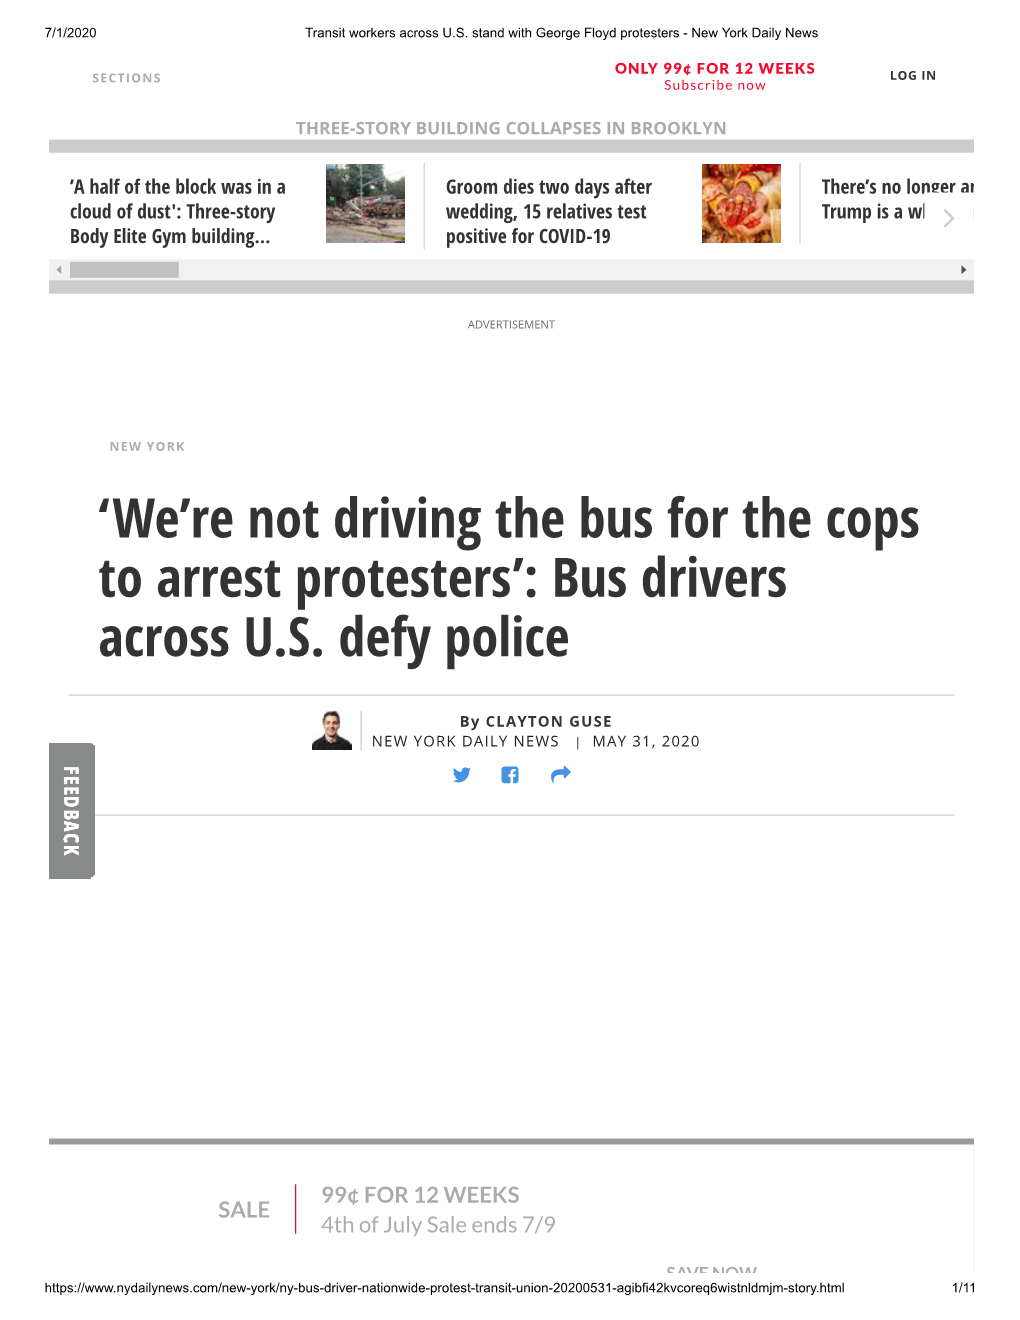 'We're Not Driving the Bus for the Cops to Arrest Protesters': Bus Drivers Across U.S. Defy Police